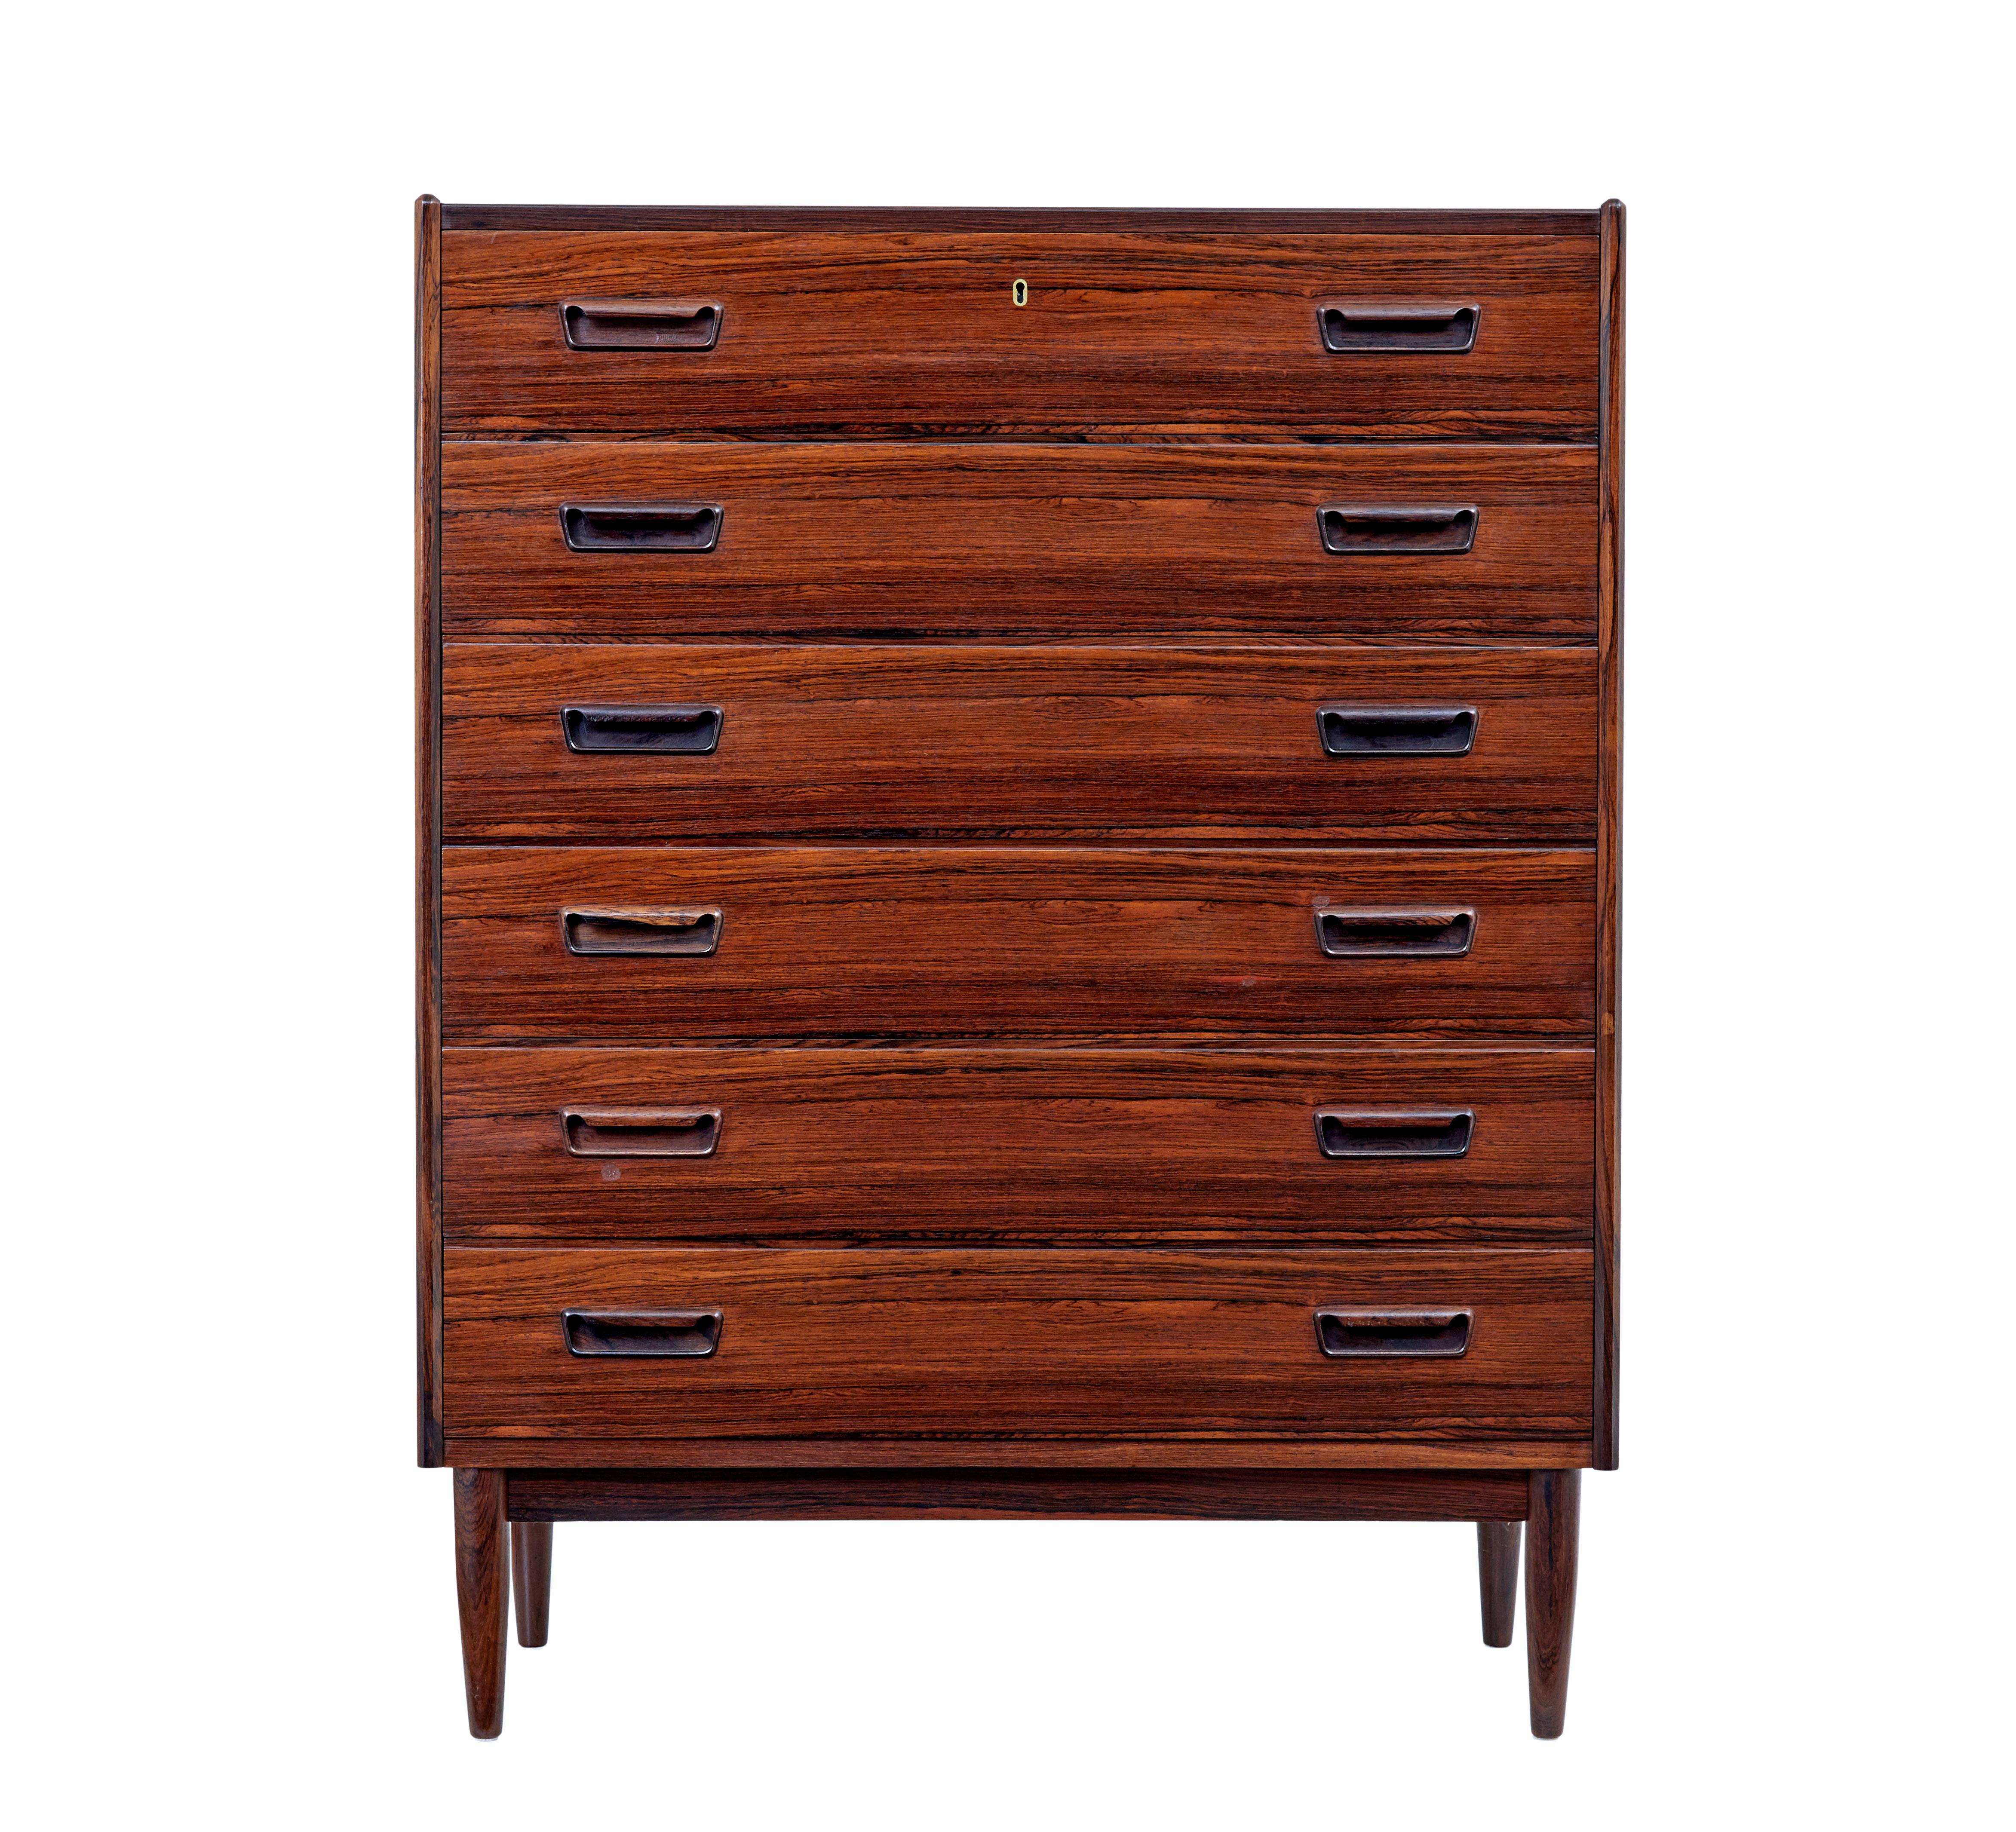 Mid 20th century palisander tall chest of drawers circa 1960.

Good quality Scandinavian tall chest of drawers.  6 equal sized drawers with fitted solid handles, top drawer fitted with a lock.

Striking veneers used, with rich colour.  Standing